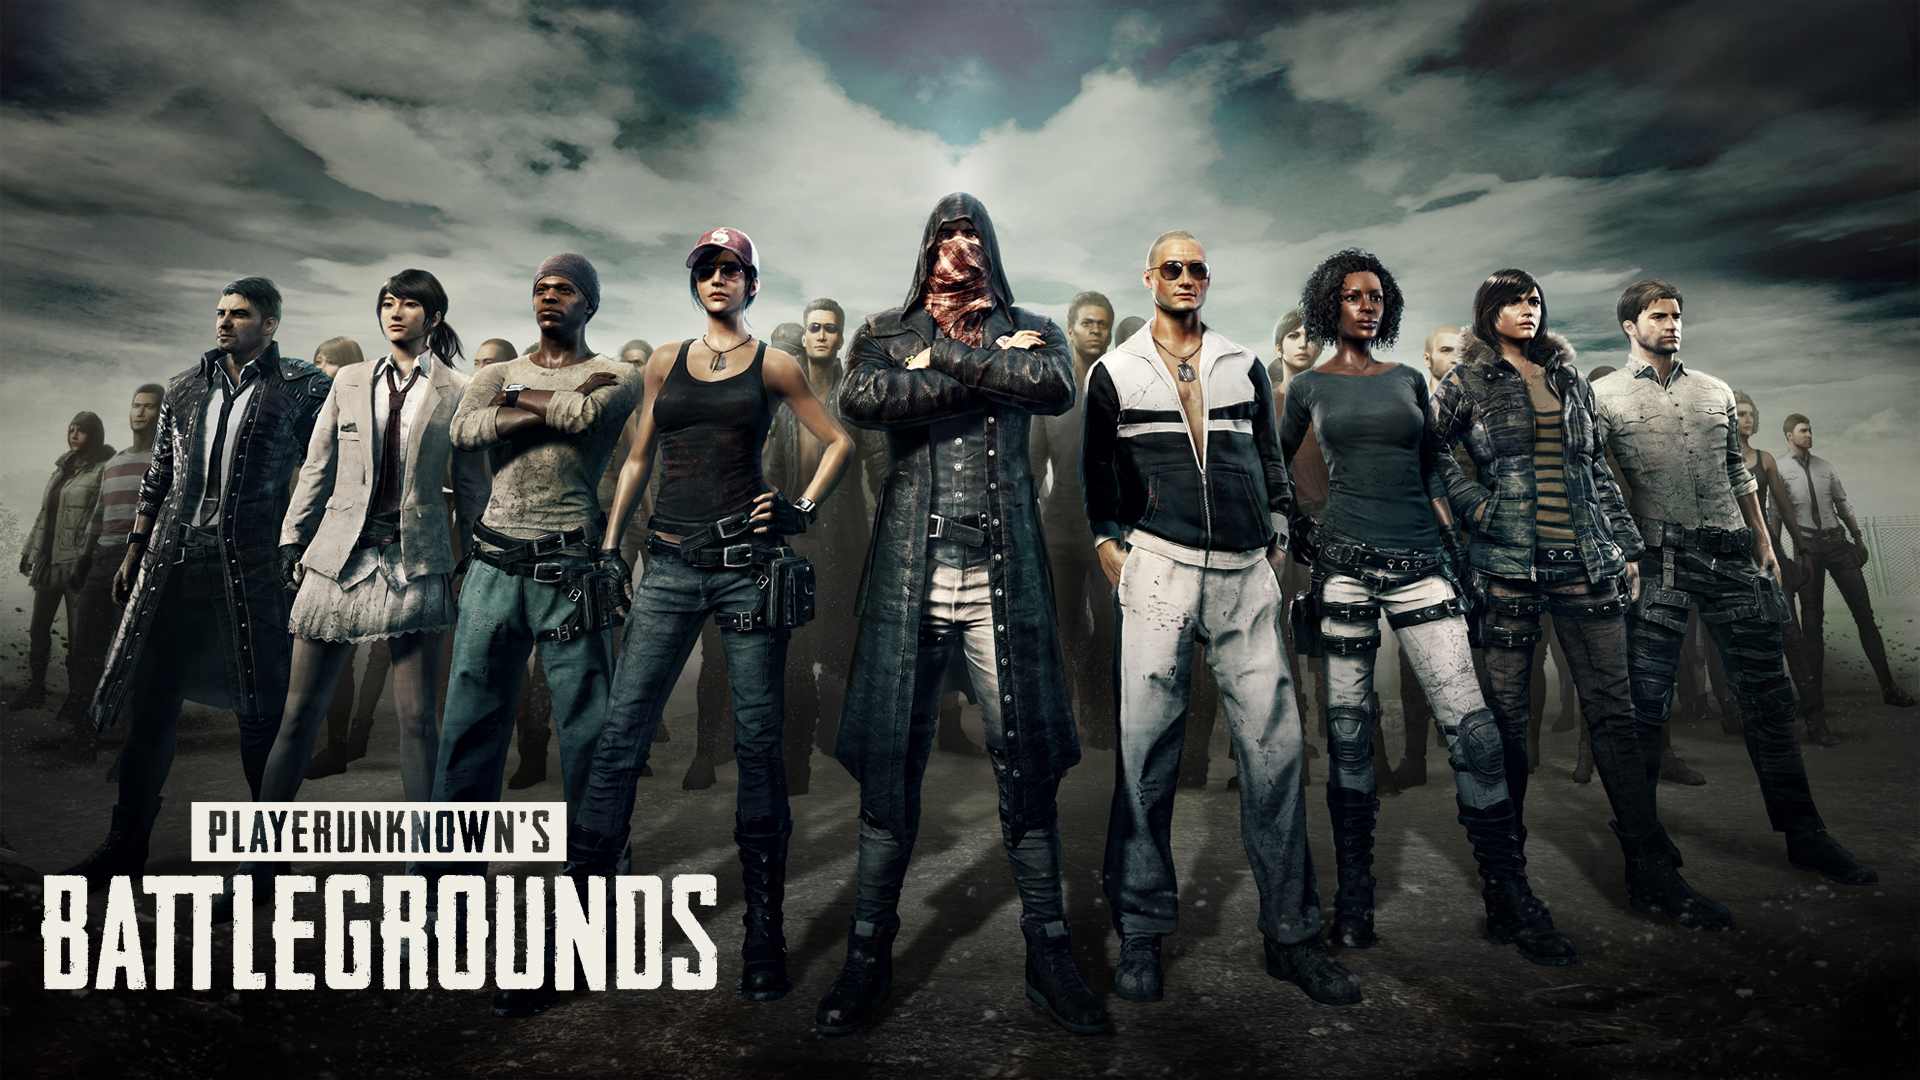 PLAYERUNKNOWN'S BATTLEGROUNDS Wallpapers, Pictures, Images